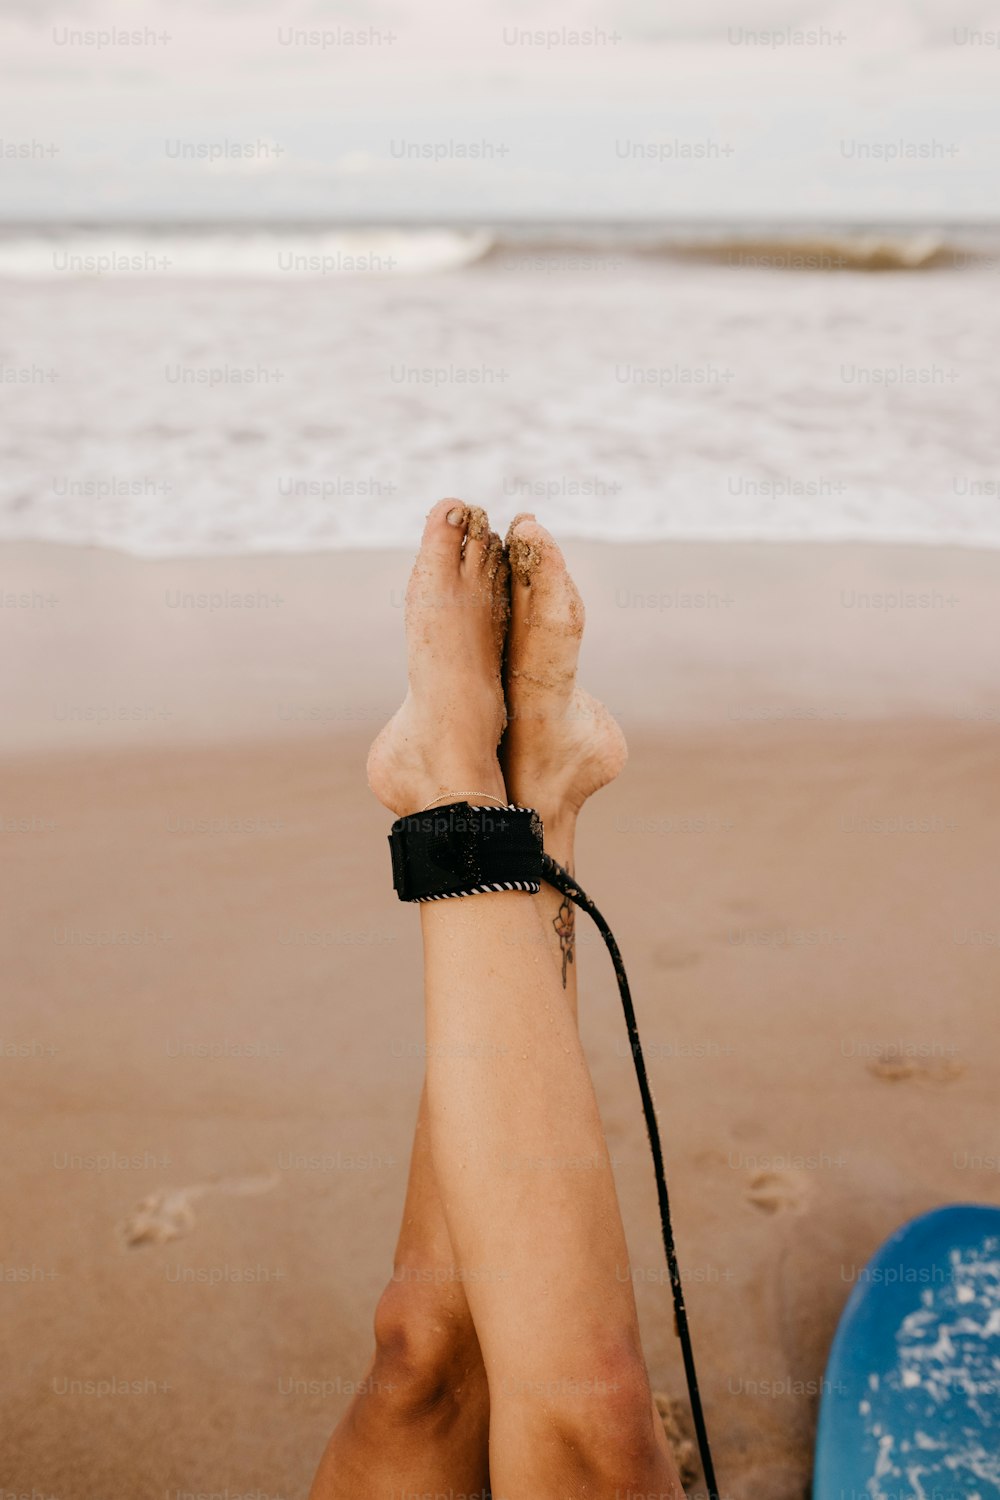 a person with their feet up on the beach